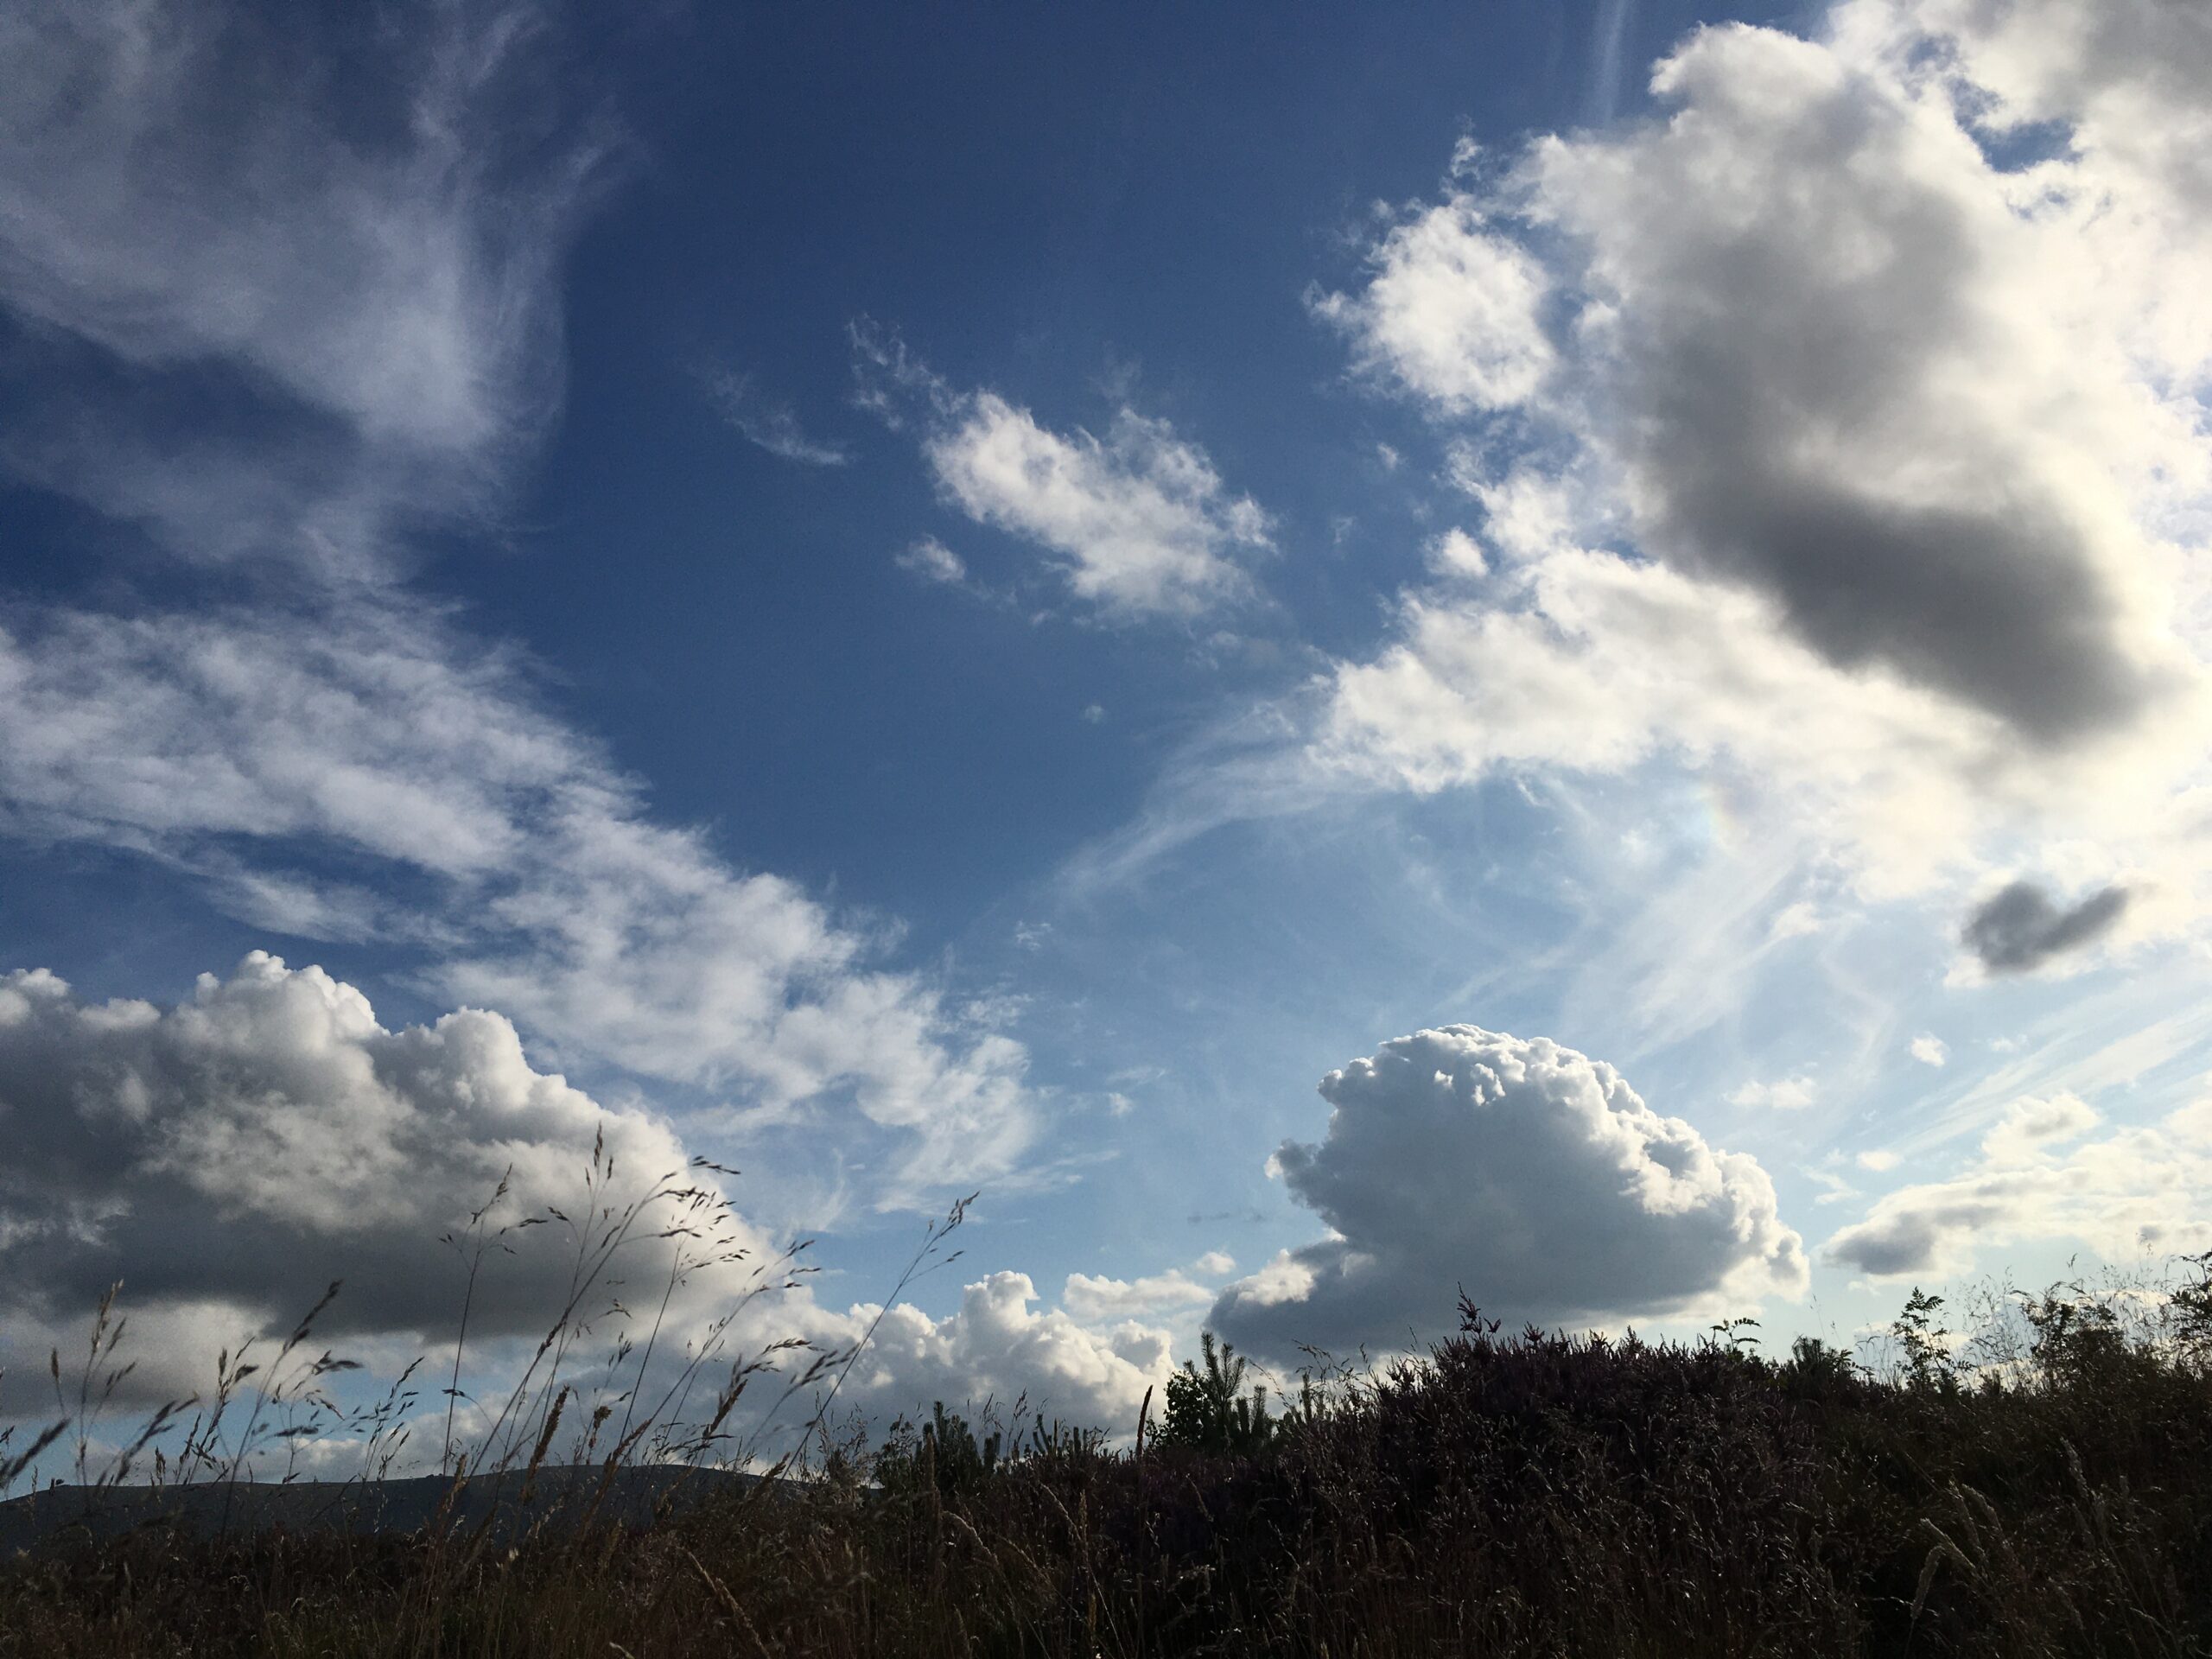 Sky over the Knock